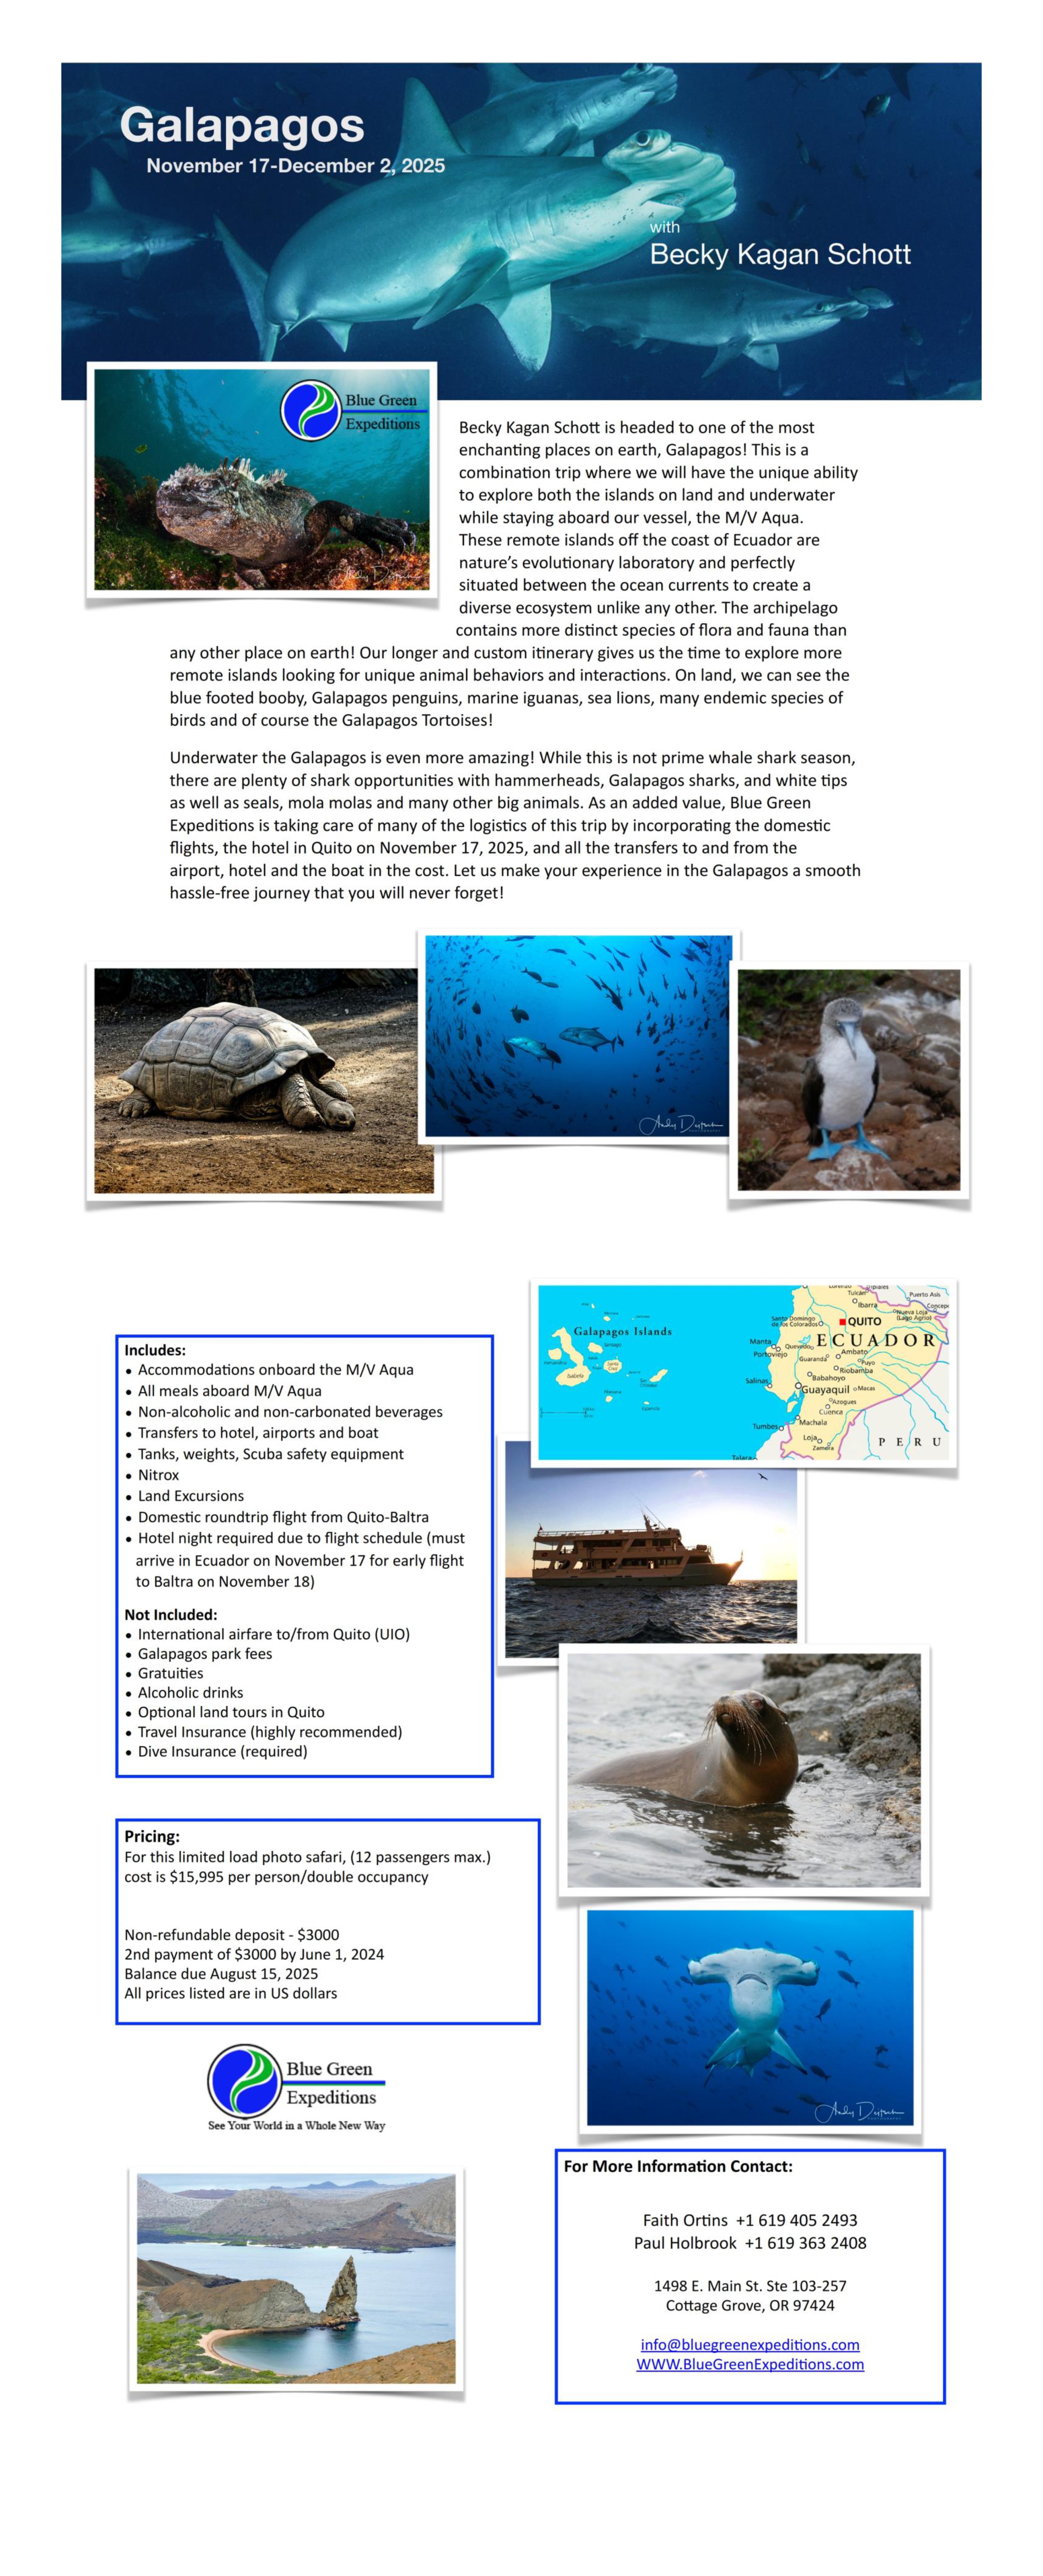 Galapagos with Becky Kegan Schott - November 17-December 2, 2025, cost and trip details.